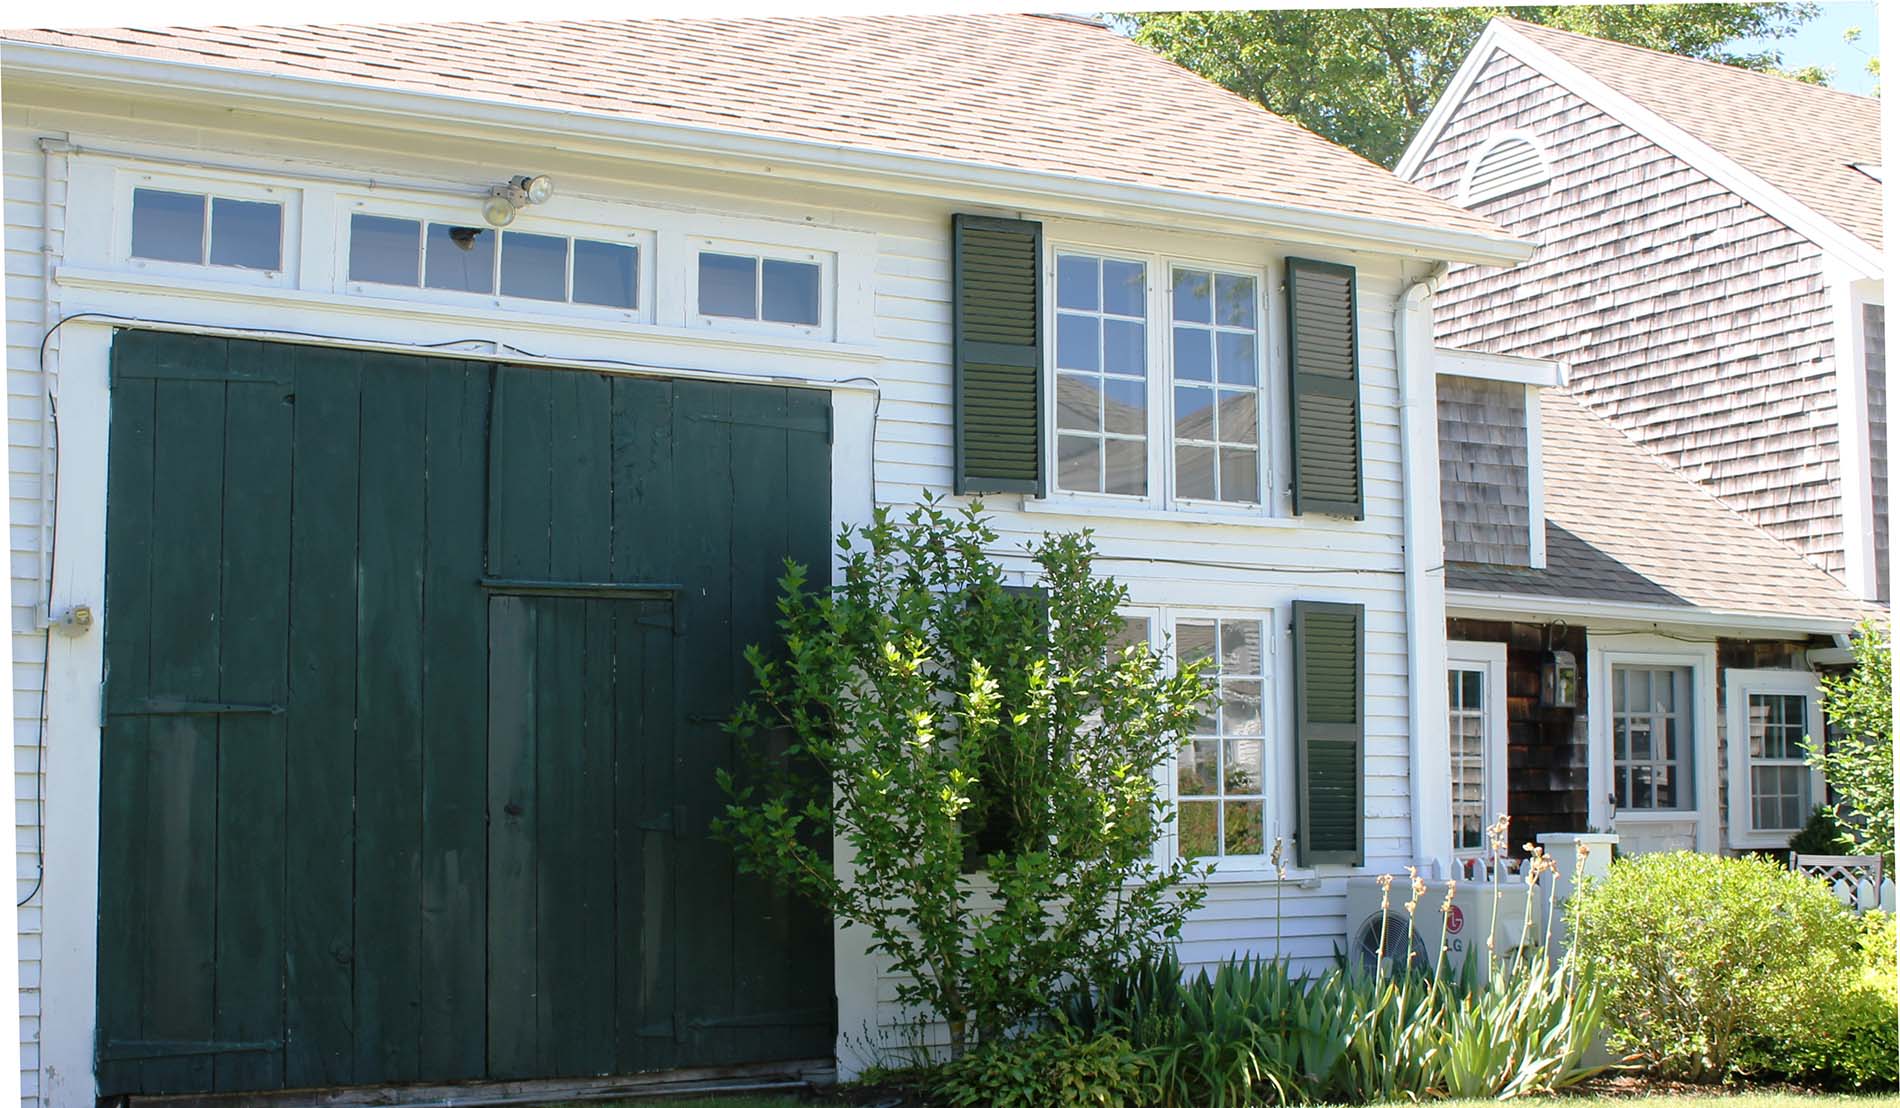 Exterior of Carriage House showing green barn door and gardens